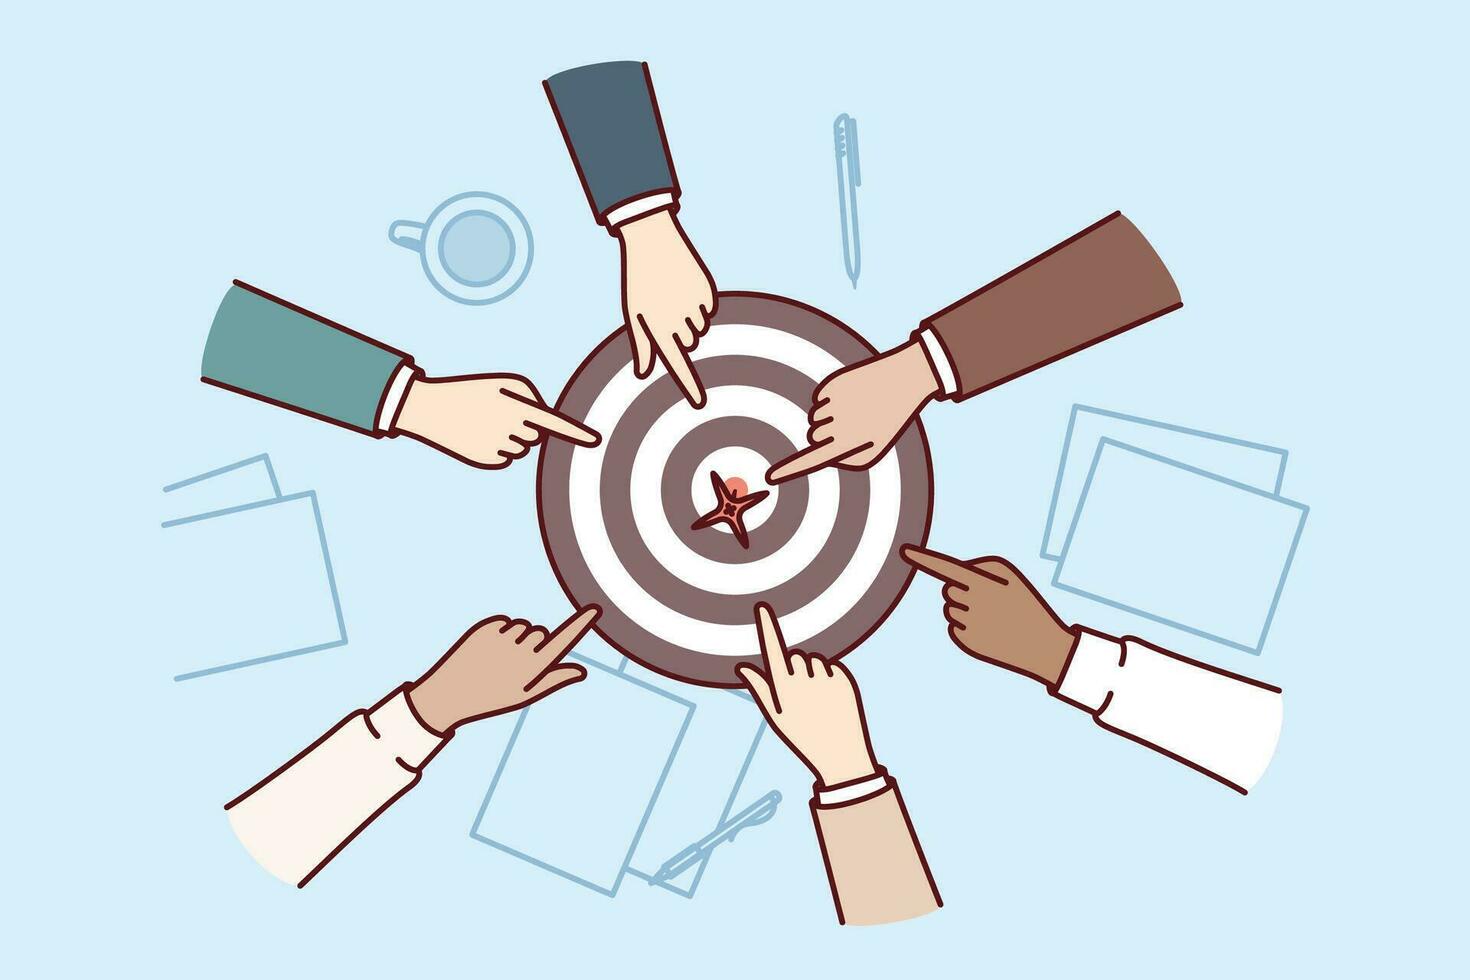 Target for darts and hands of purposeful people working together to achieve tasks or goals set by manager. Teamwork concept to achieve goals and make progress in business and career success vector